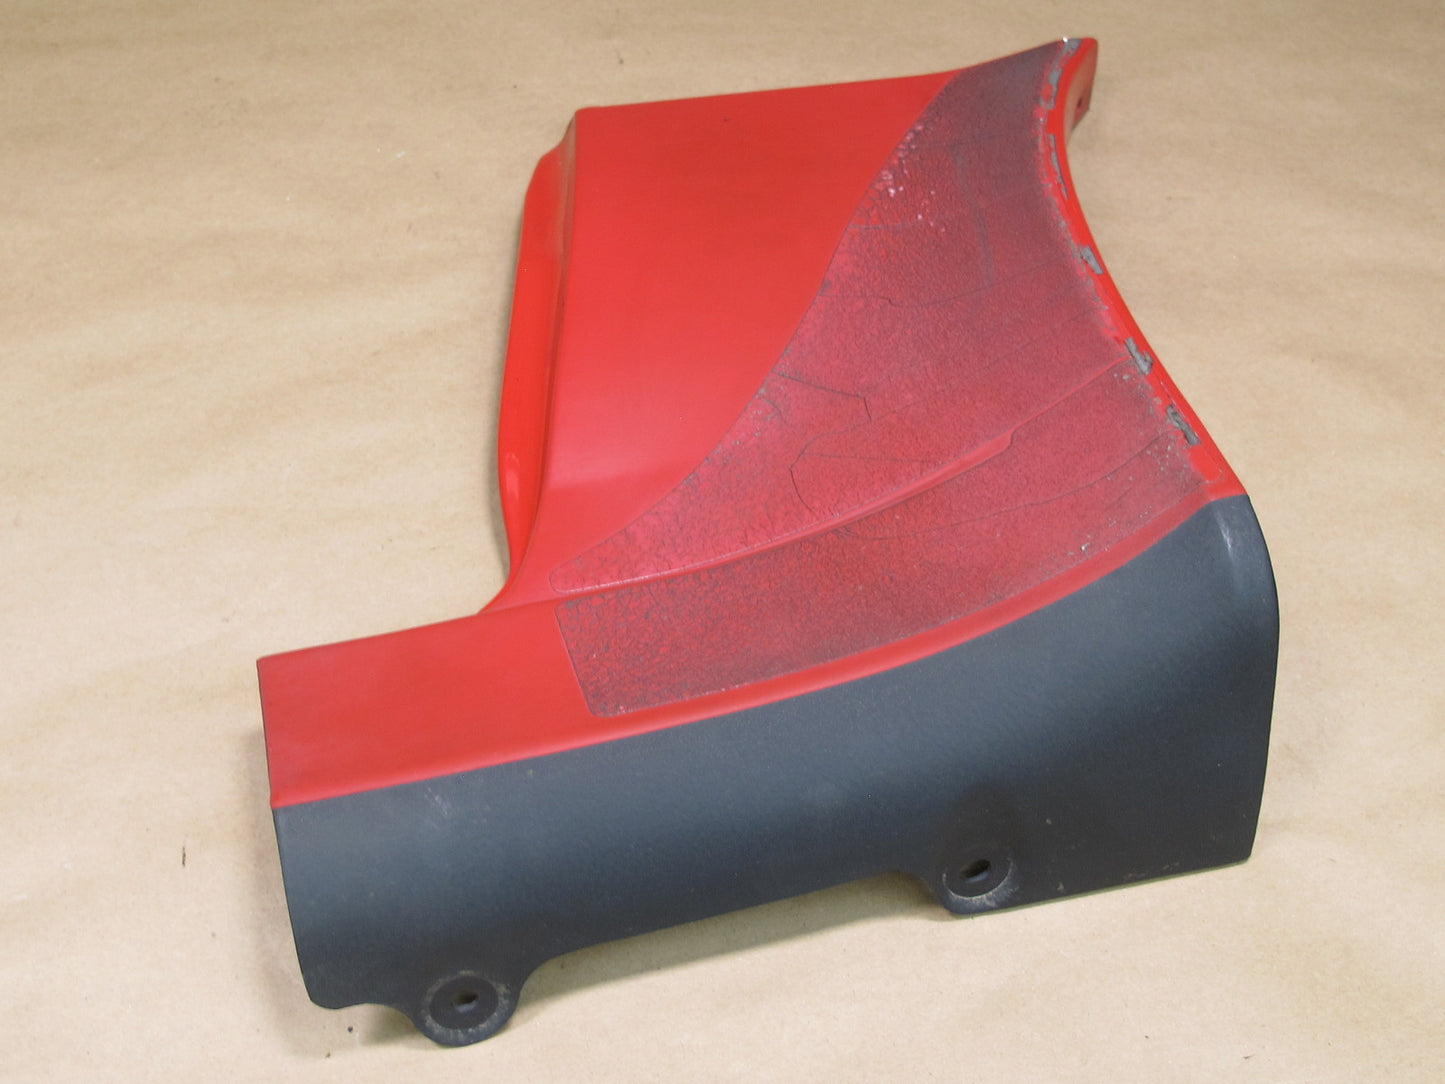 90-92 Toyota Supra MK3 Set of 4 Front & Rear Left & Right MUD Guard RED OEM